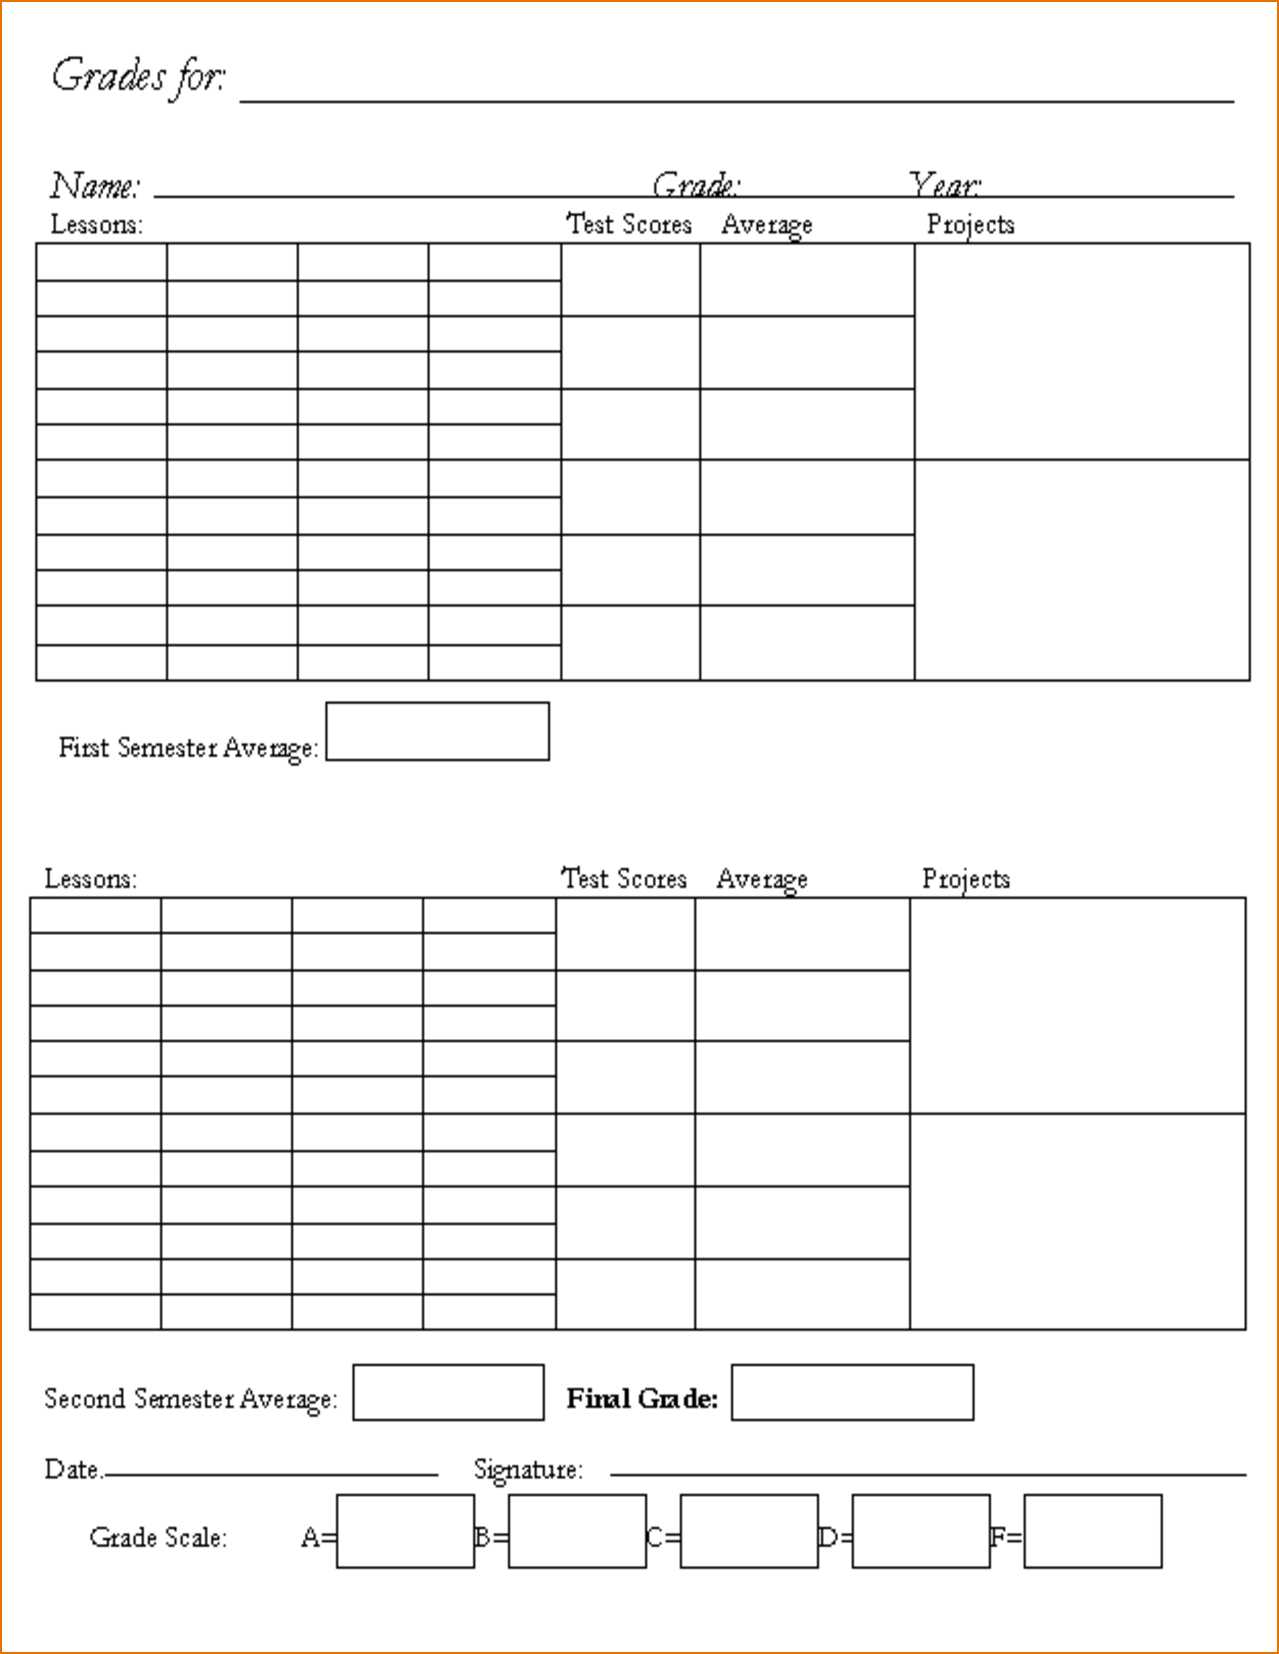 Name Card Template For Kindergarten Throughout Boyfriend Within Boyfriend Report Card Template